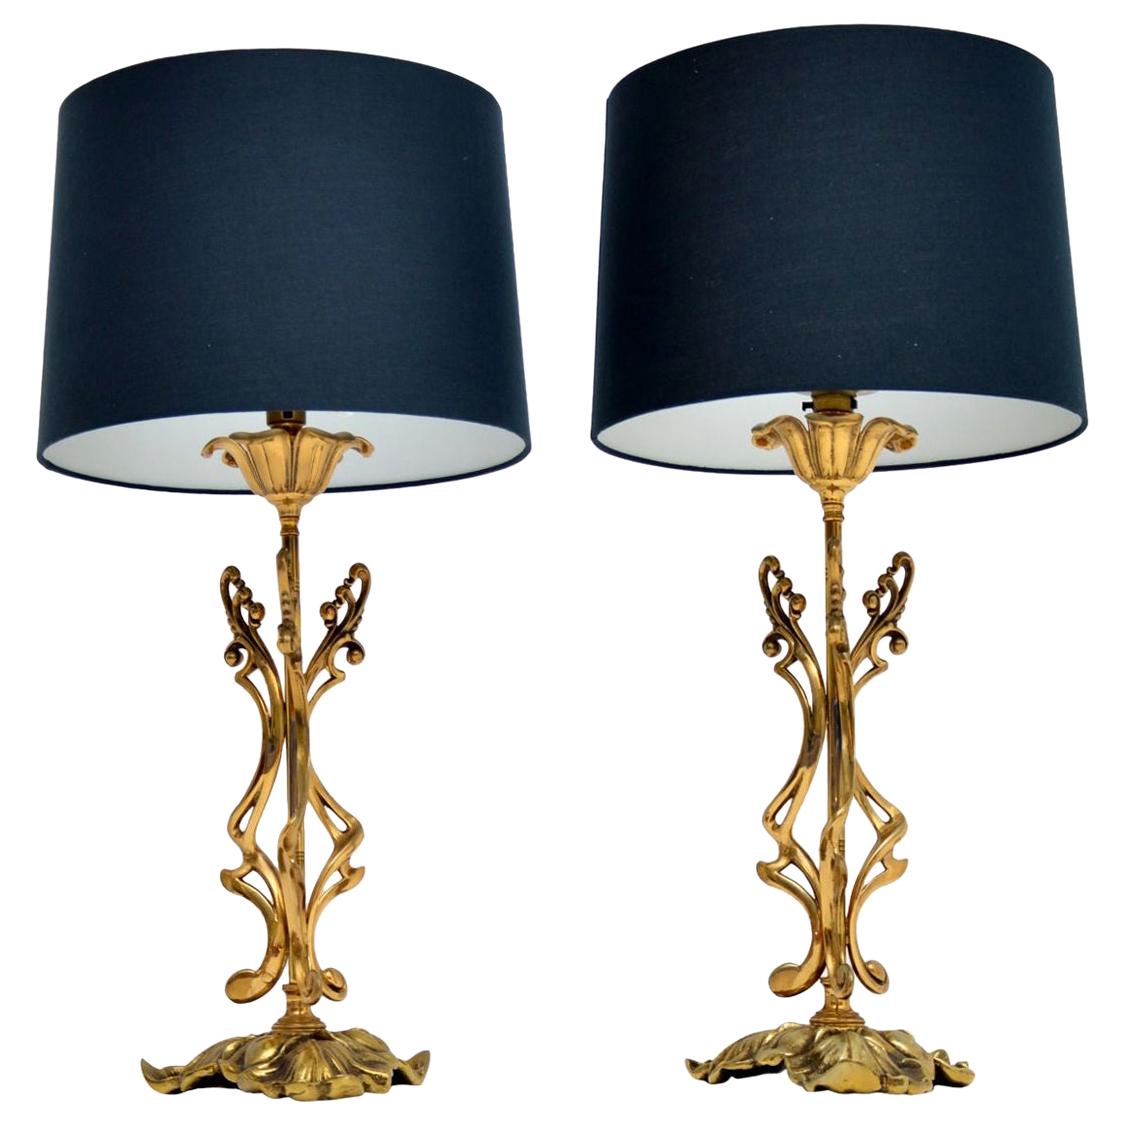 Pair of Vintage Italian Brass Table Lamps